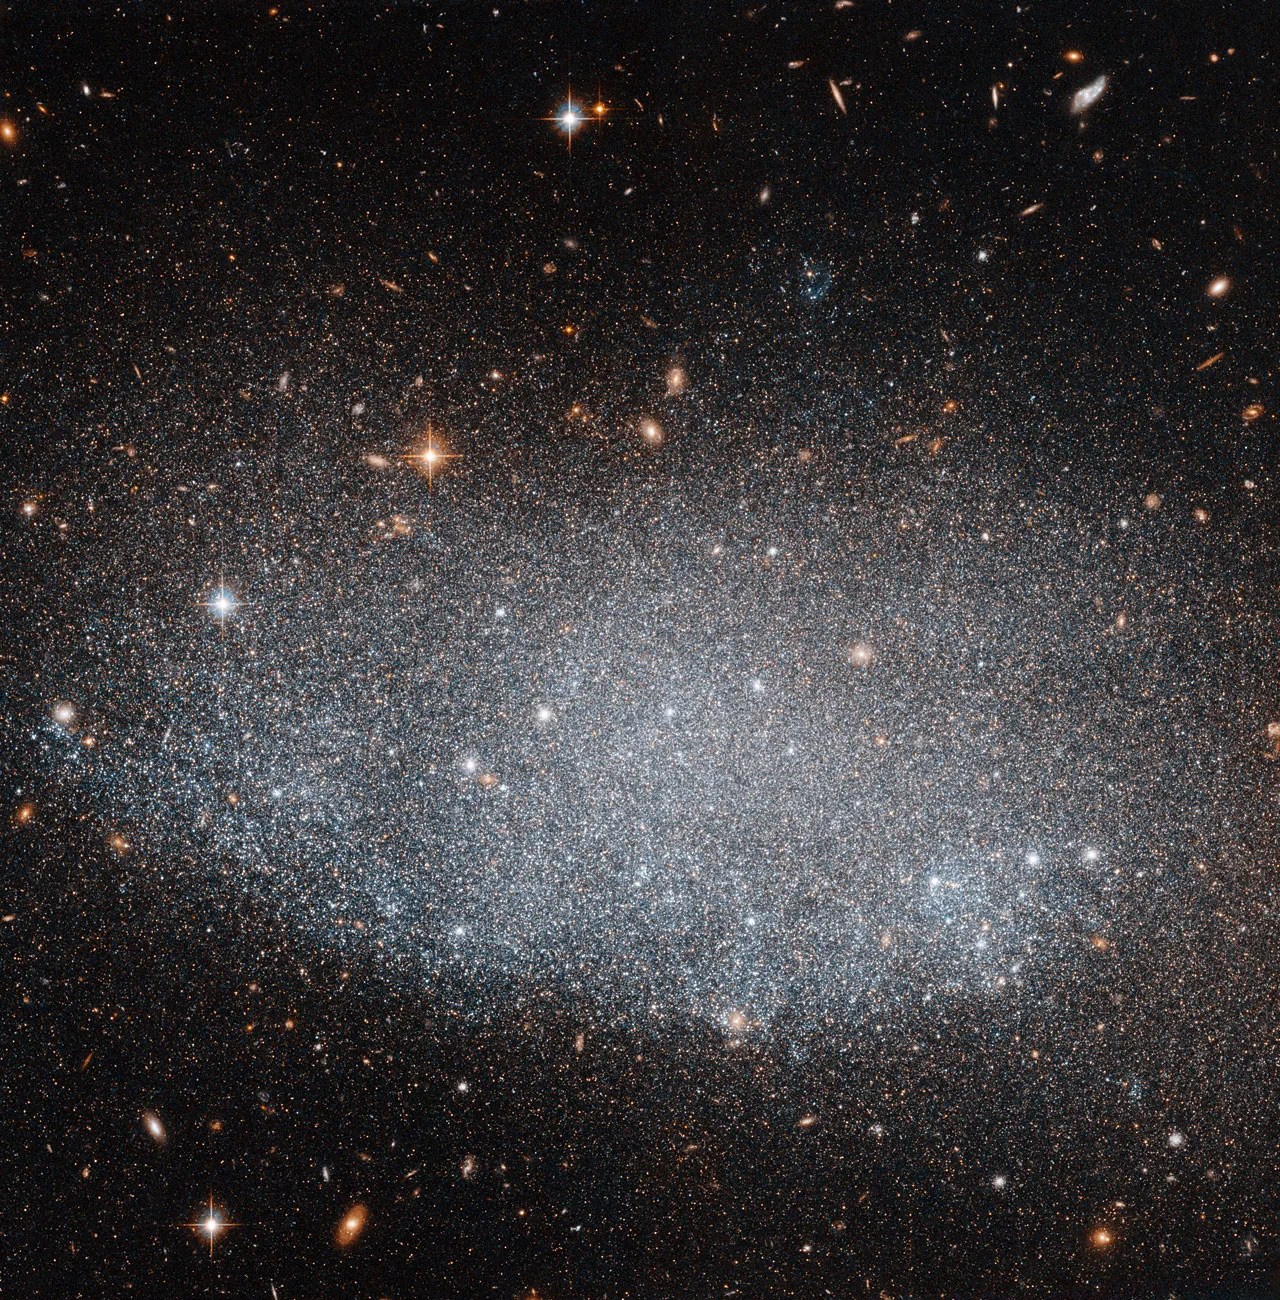 A large, irregular oval of stars fills the image. Some bright foreground stars and many smaller, more-distant galaxies are visible in the background.